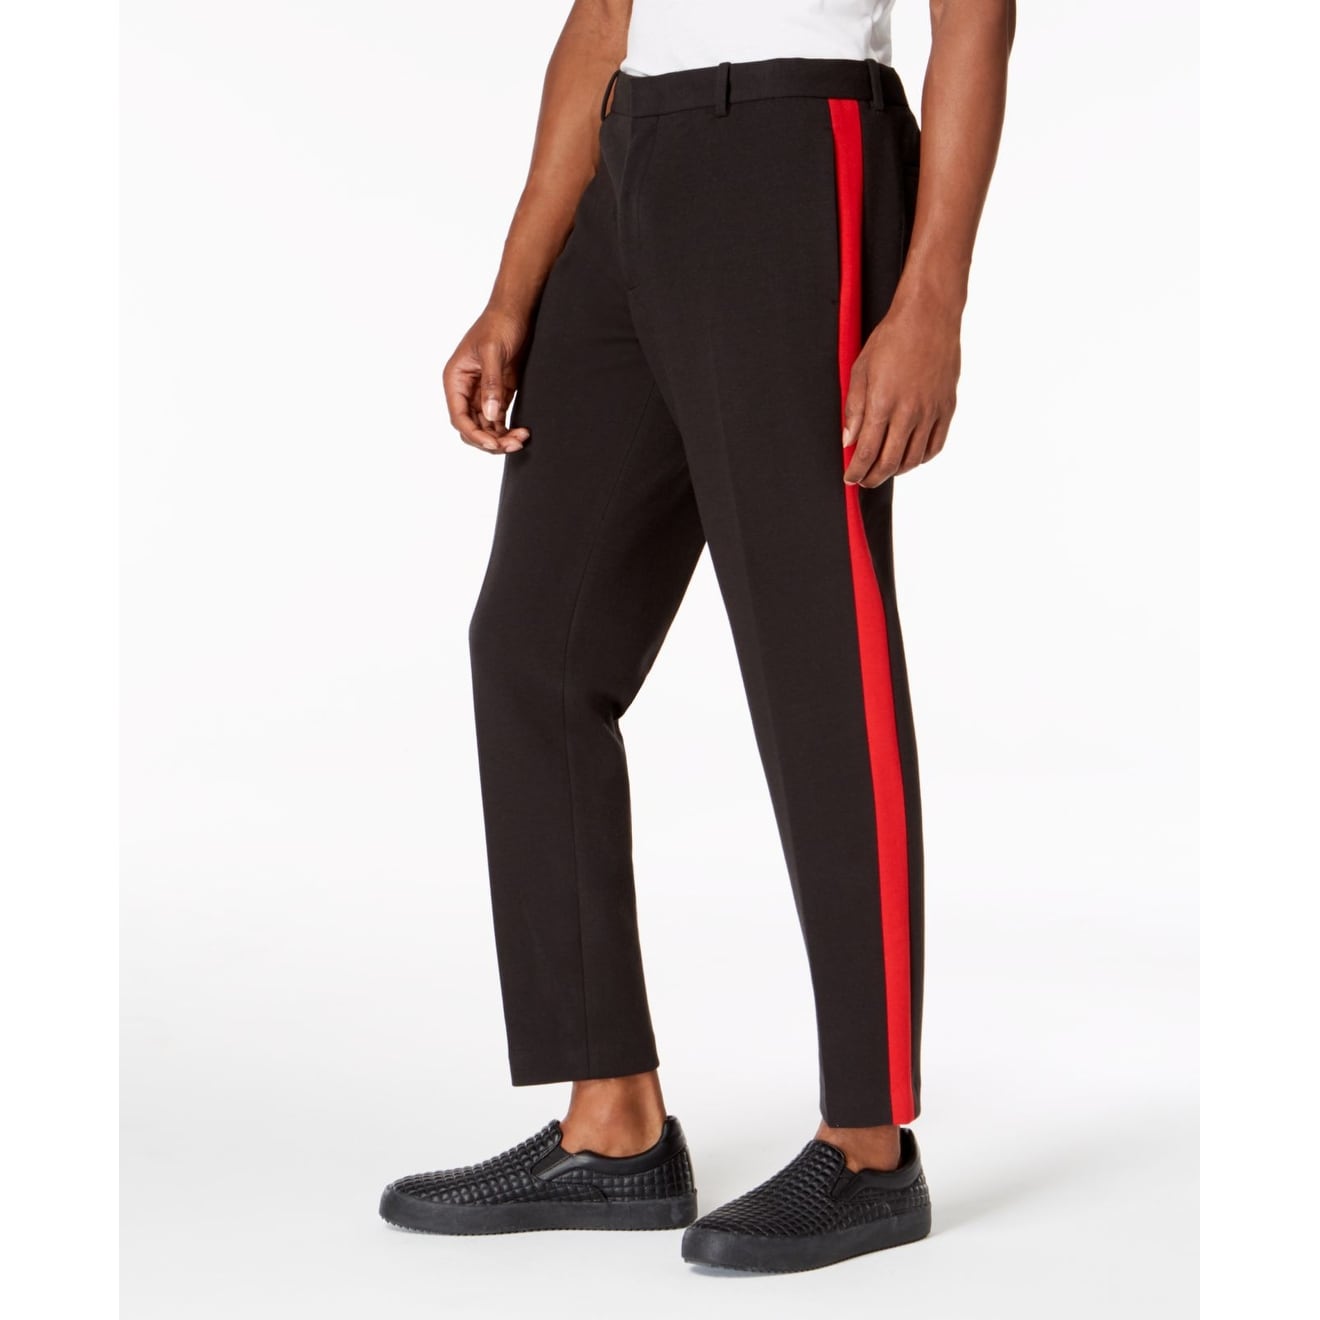 mens black and red striped pants